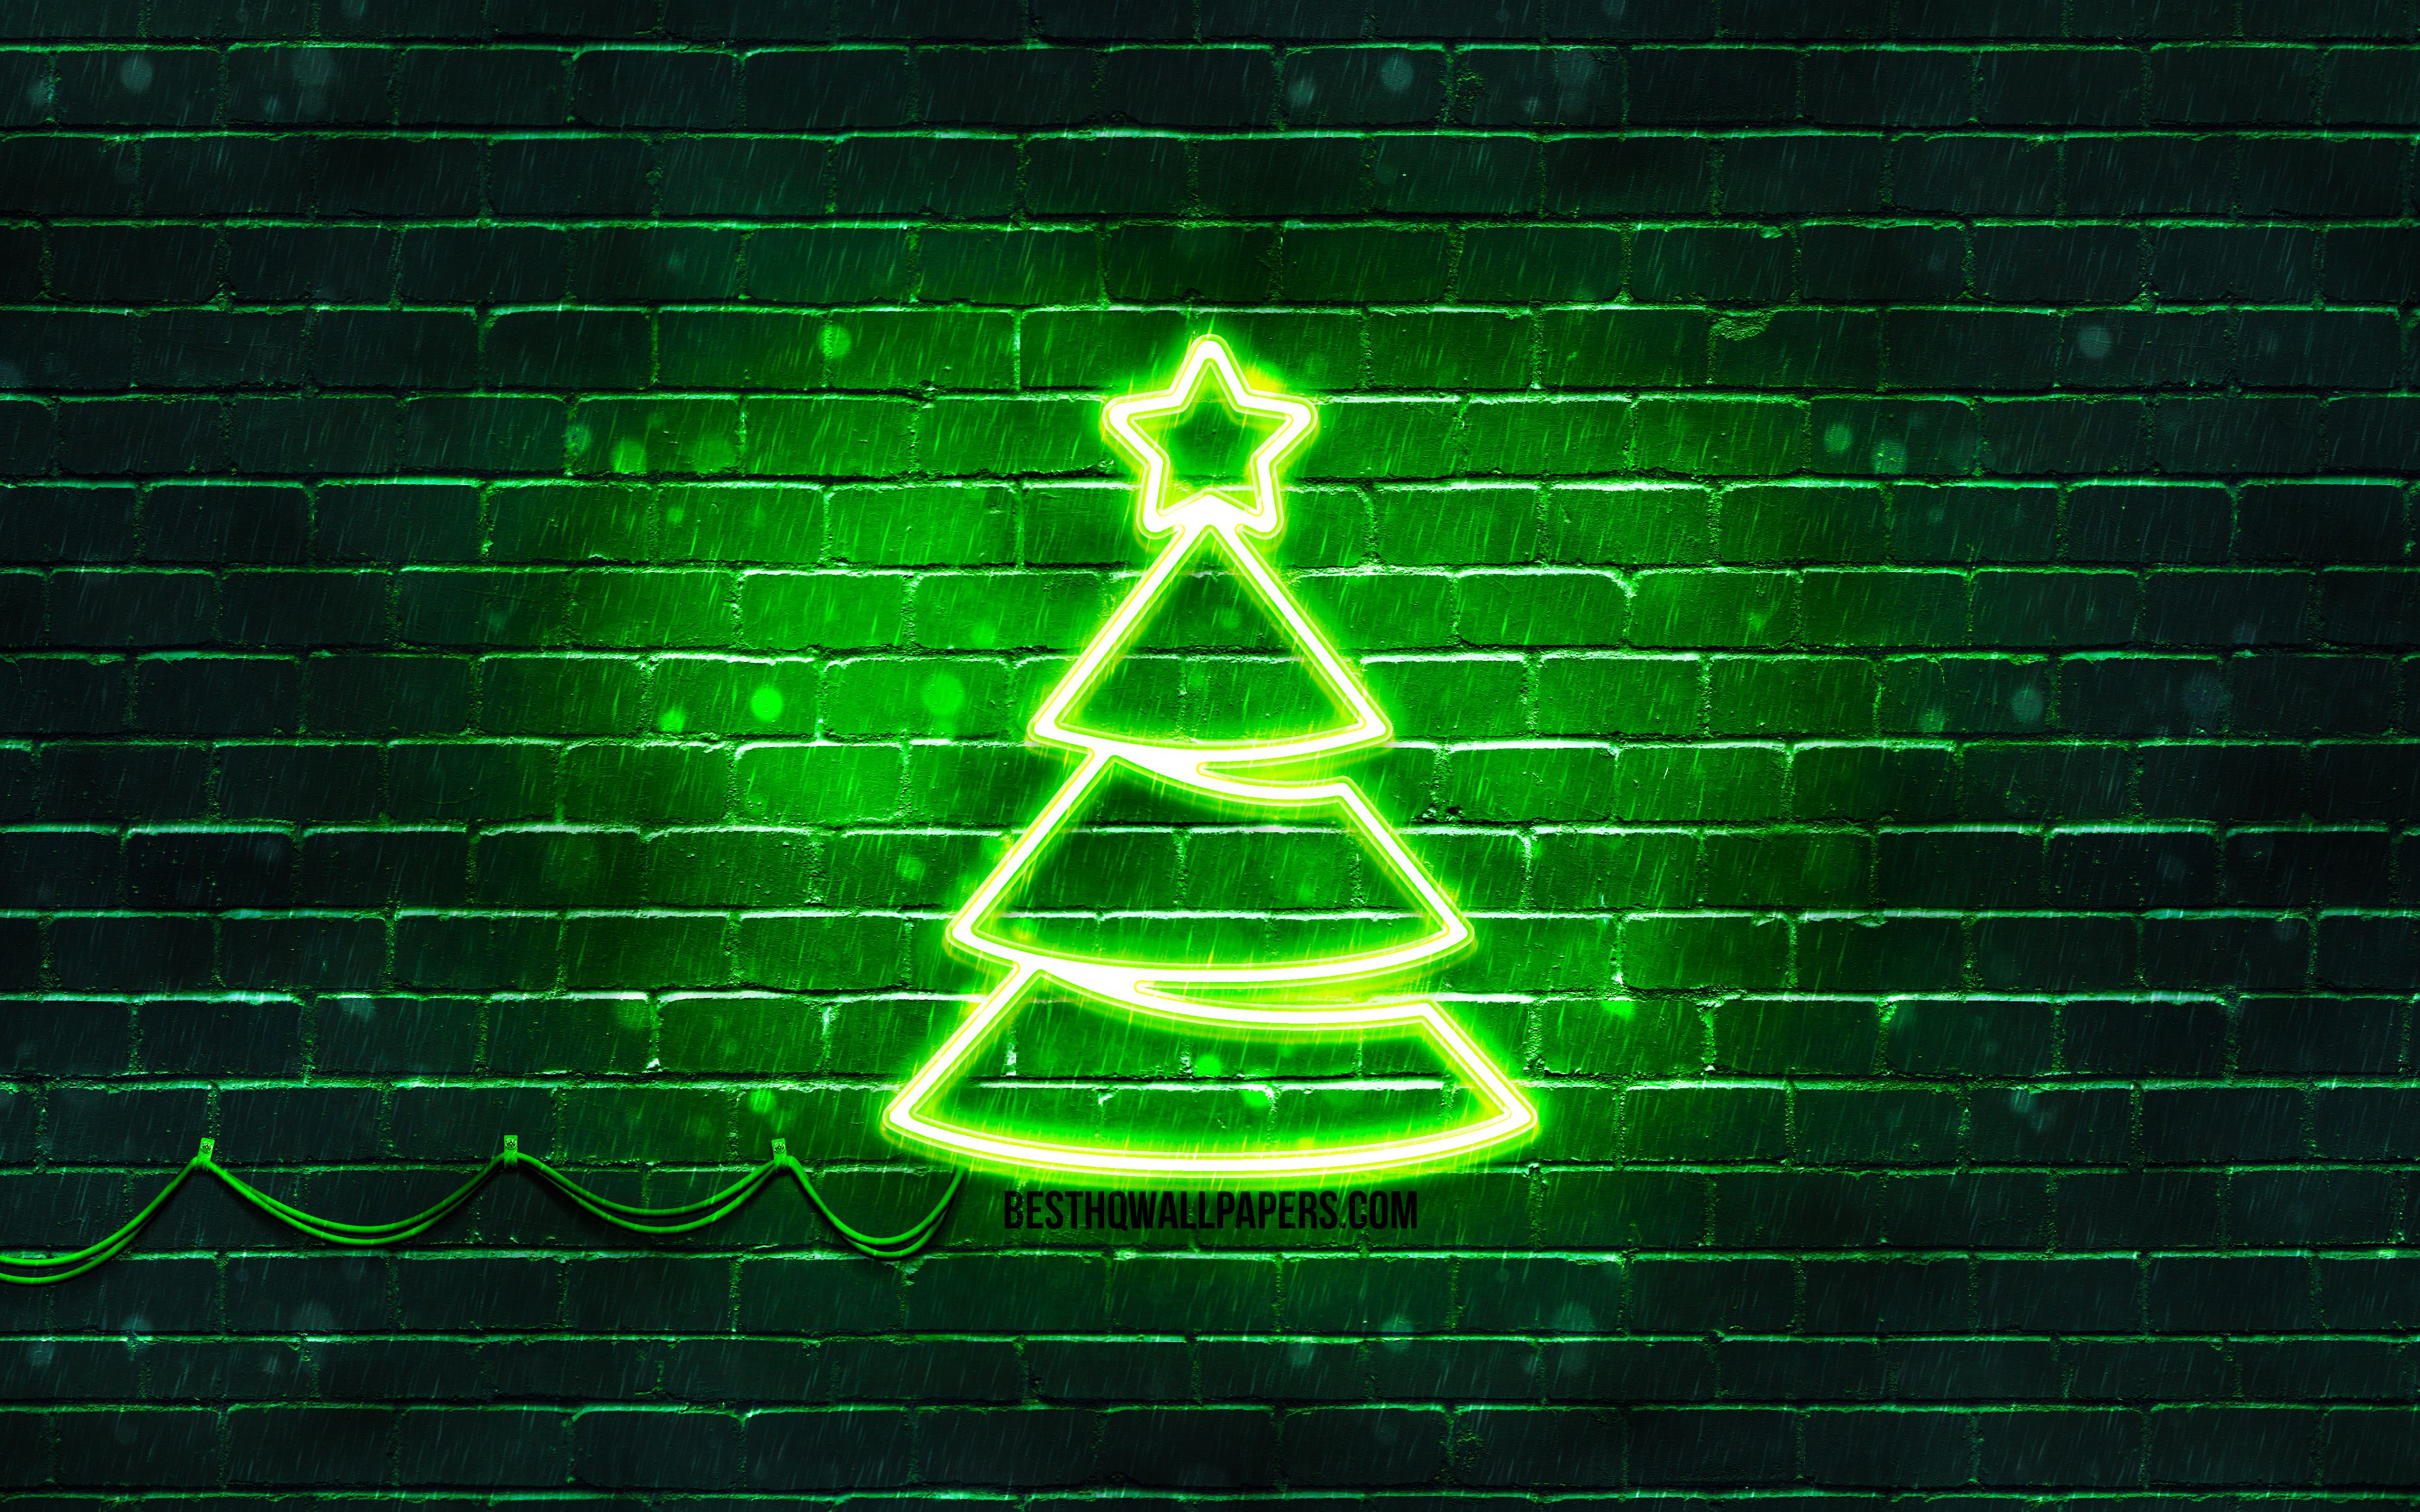 Download wallpaper Green neon Christmas Tree, 4k, Green brickwall, Happy New Years Concept, Green Christmas Tree, Xmas Trees, Christmas Trees for desktop with resolution 3840x2400. High Quality HD picture wallpaper